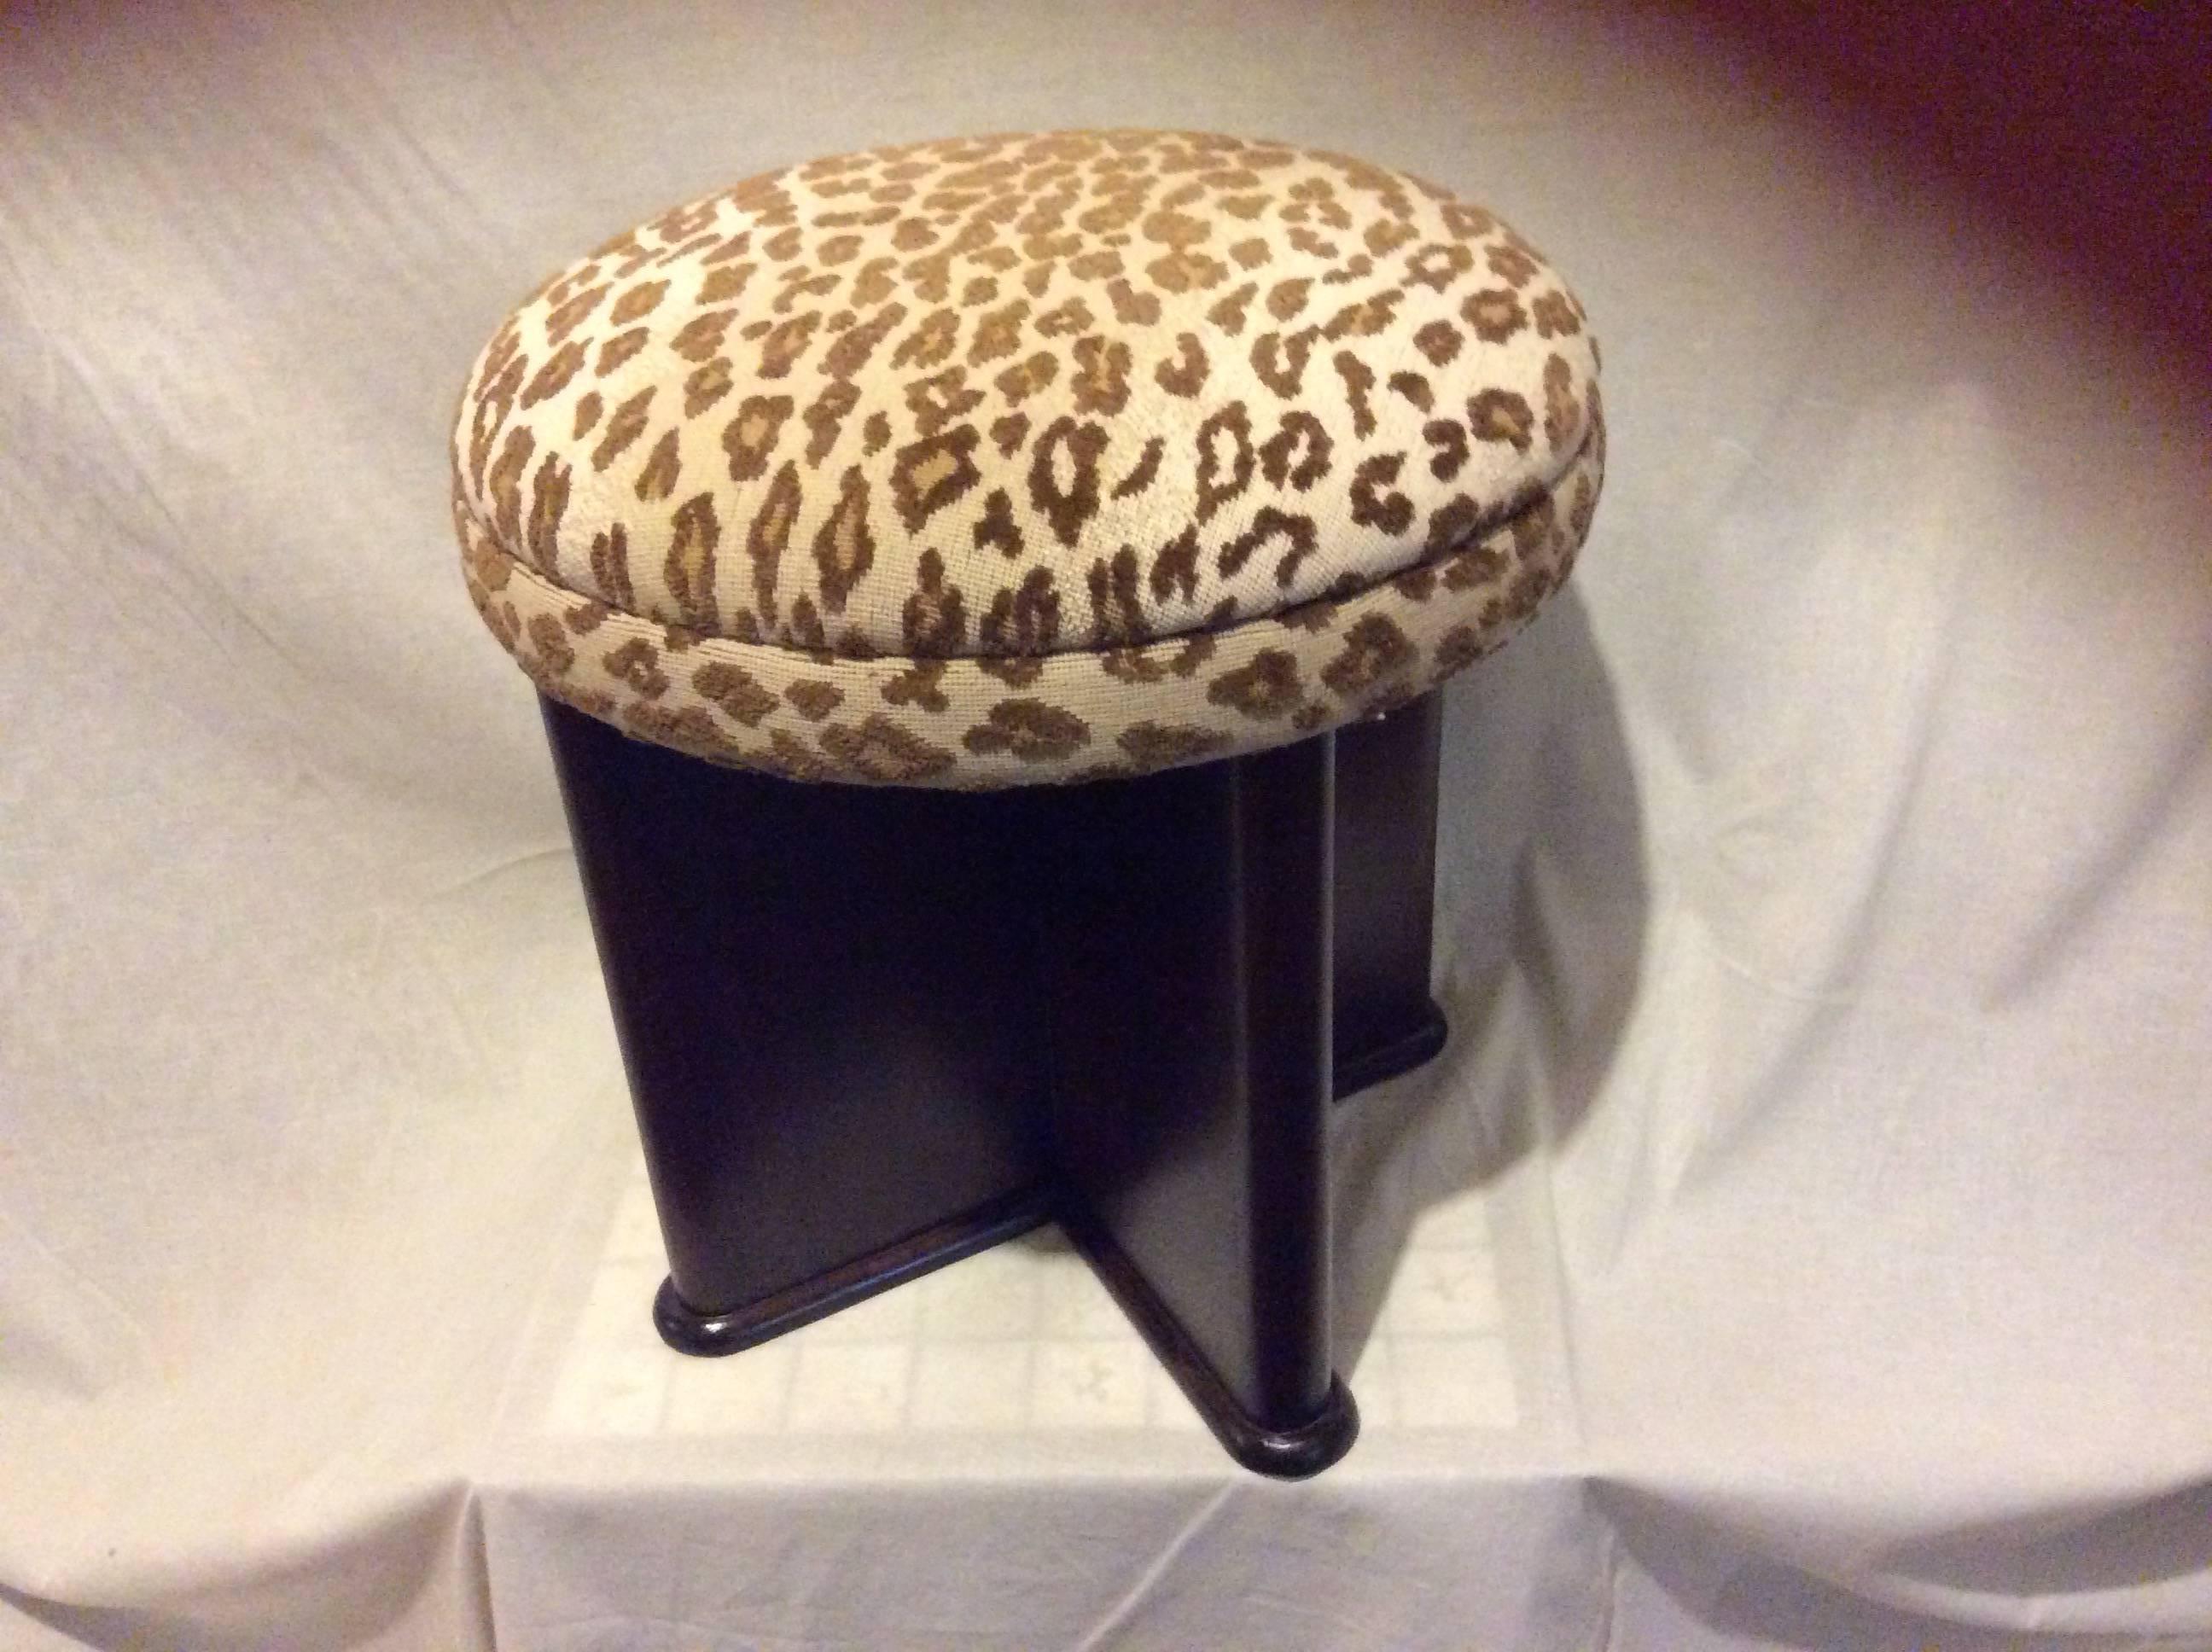 Mahogany stool, ottoman or pull up occasional seat with 'X' designed mahagony base makes the perfect accent piece covered in the most luxurious faux leopard fafric of needlepoint and velour by Clarence House